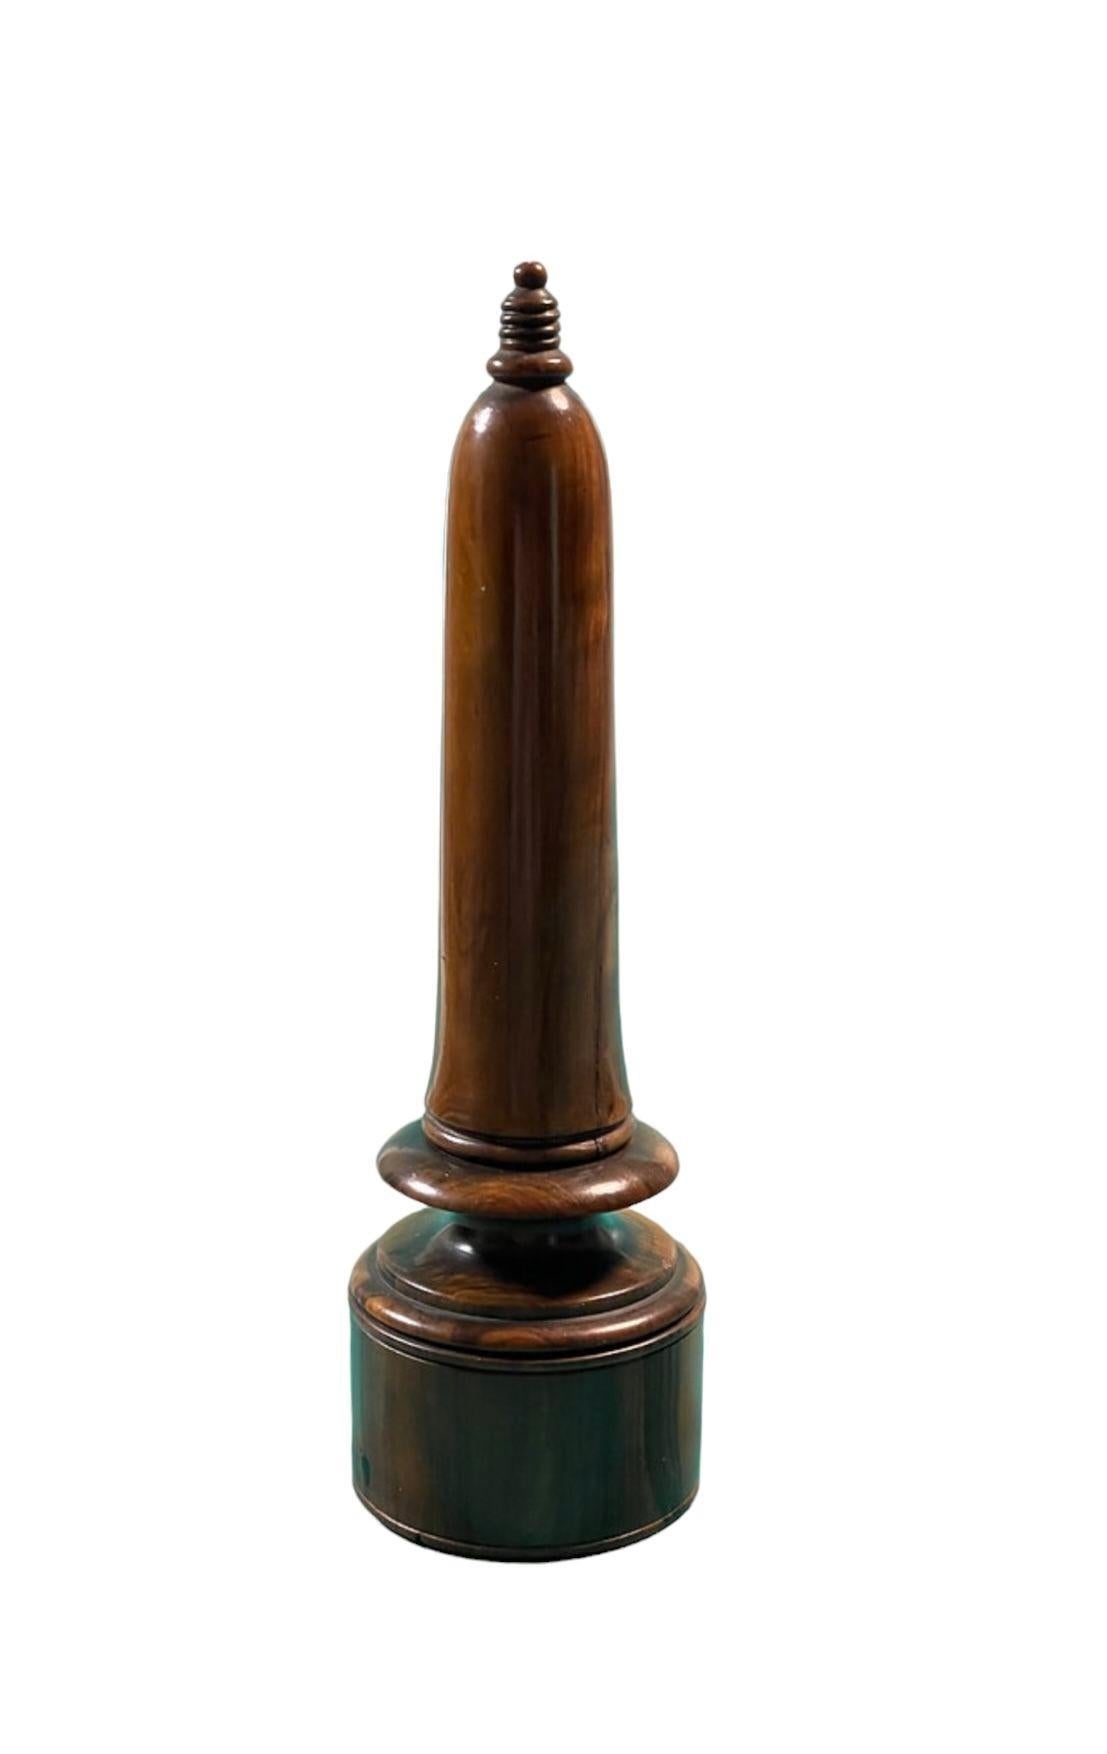 British Antique Treen Traveling Candlestick and Match Holder, 19th Century For Sale